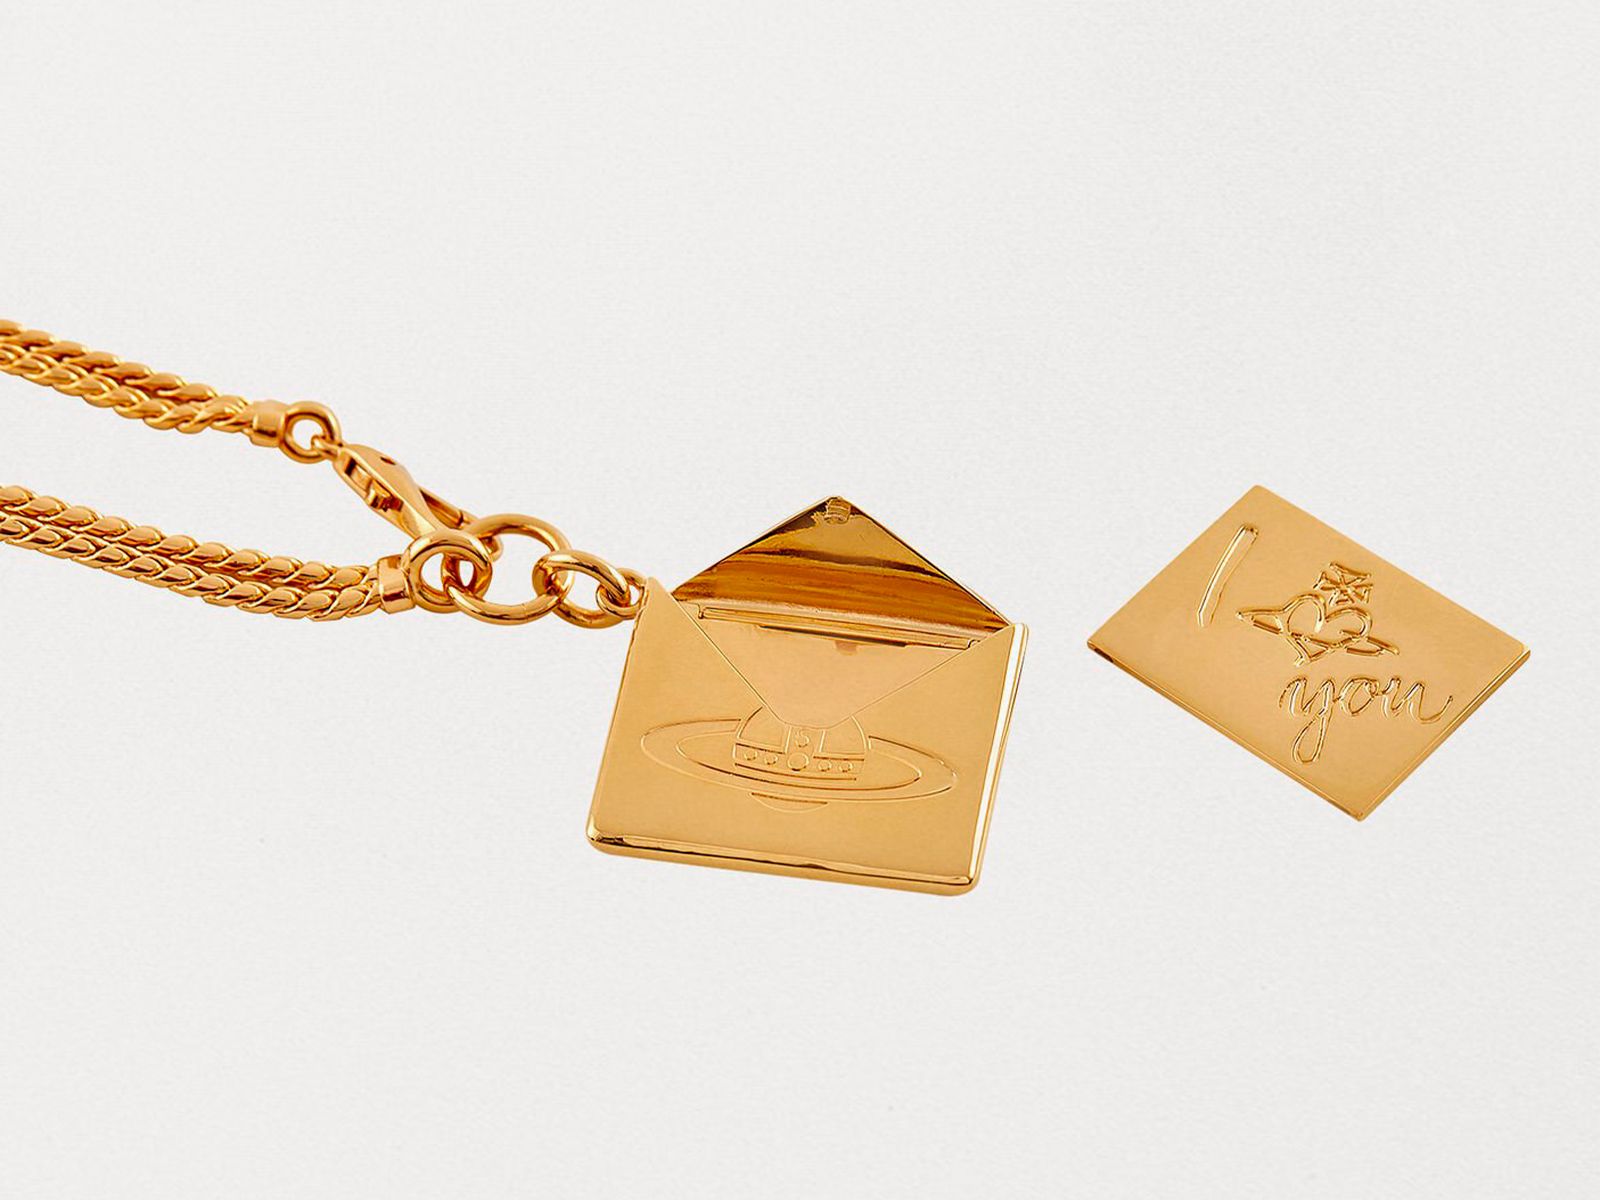 The perfect gift for Valentine’s Day is from Vivienne Westwood